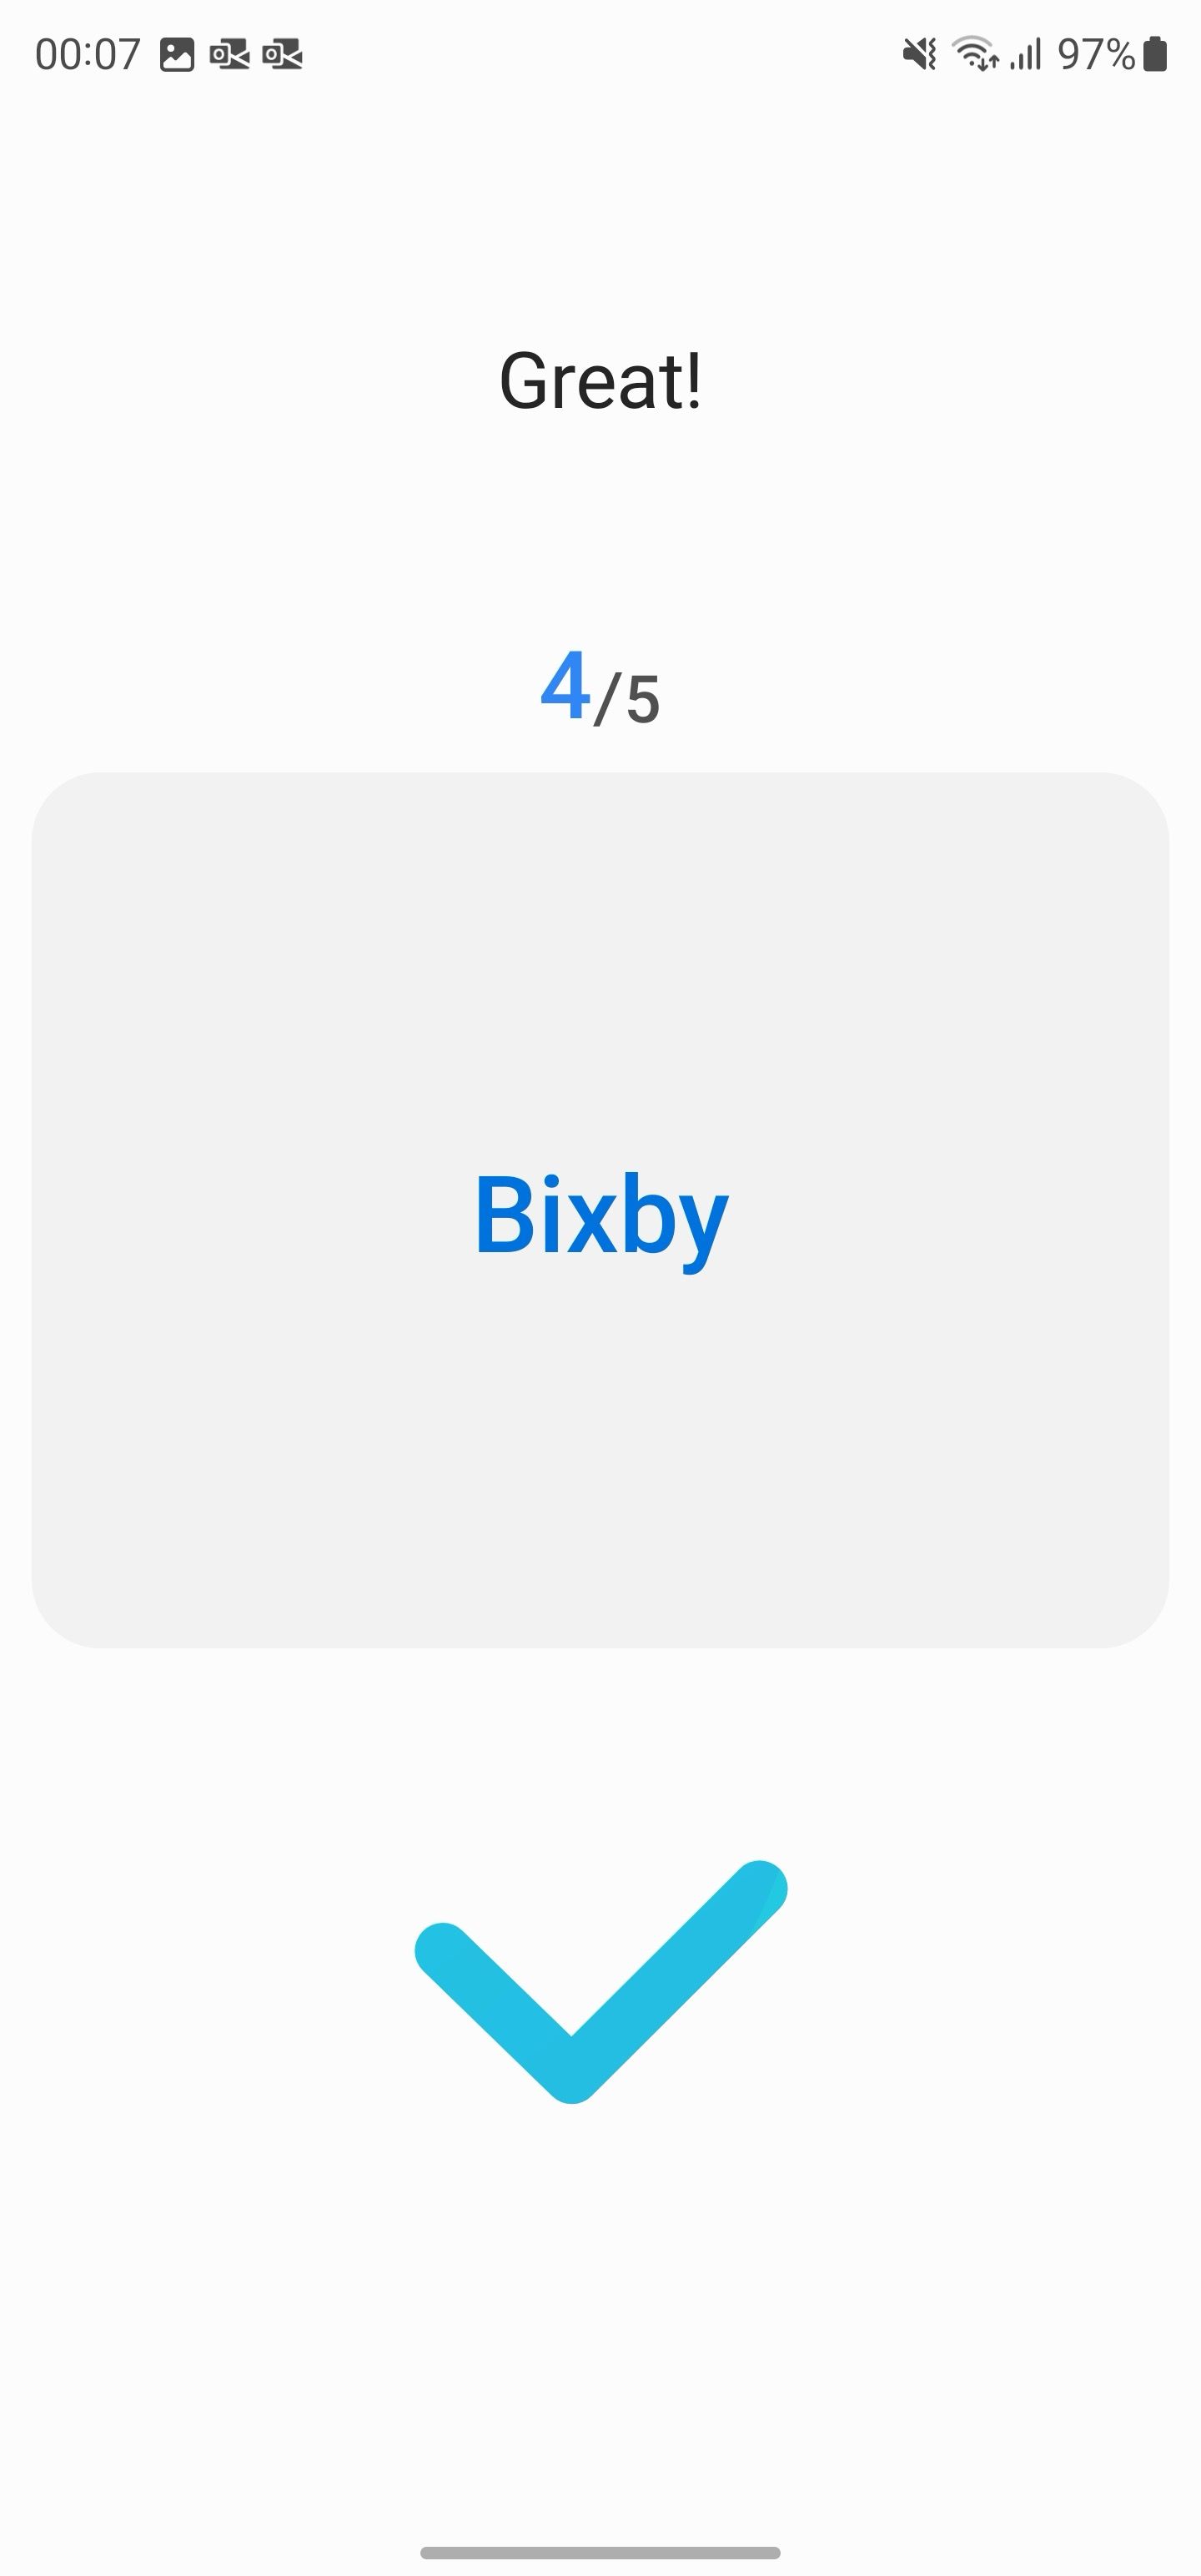 Train Bixby your voice